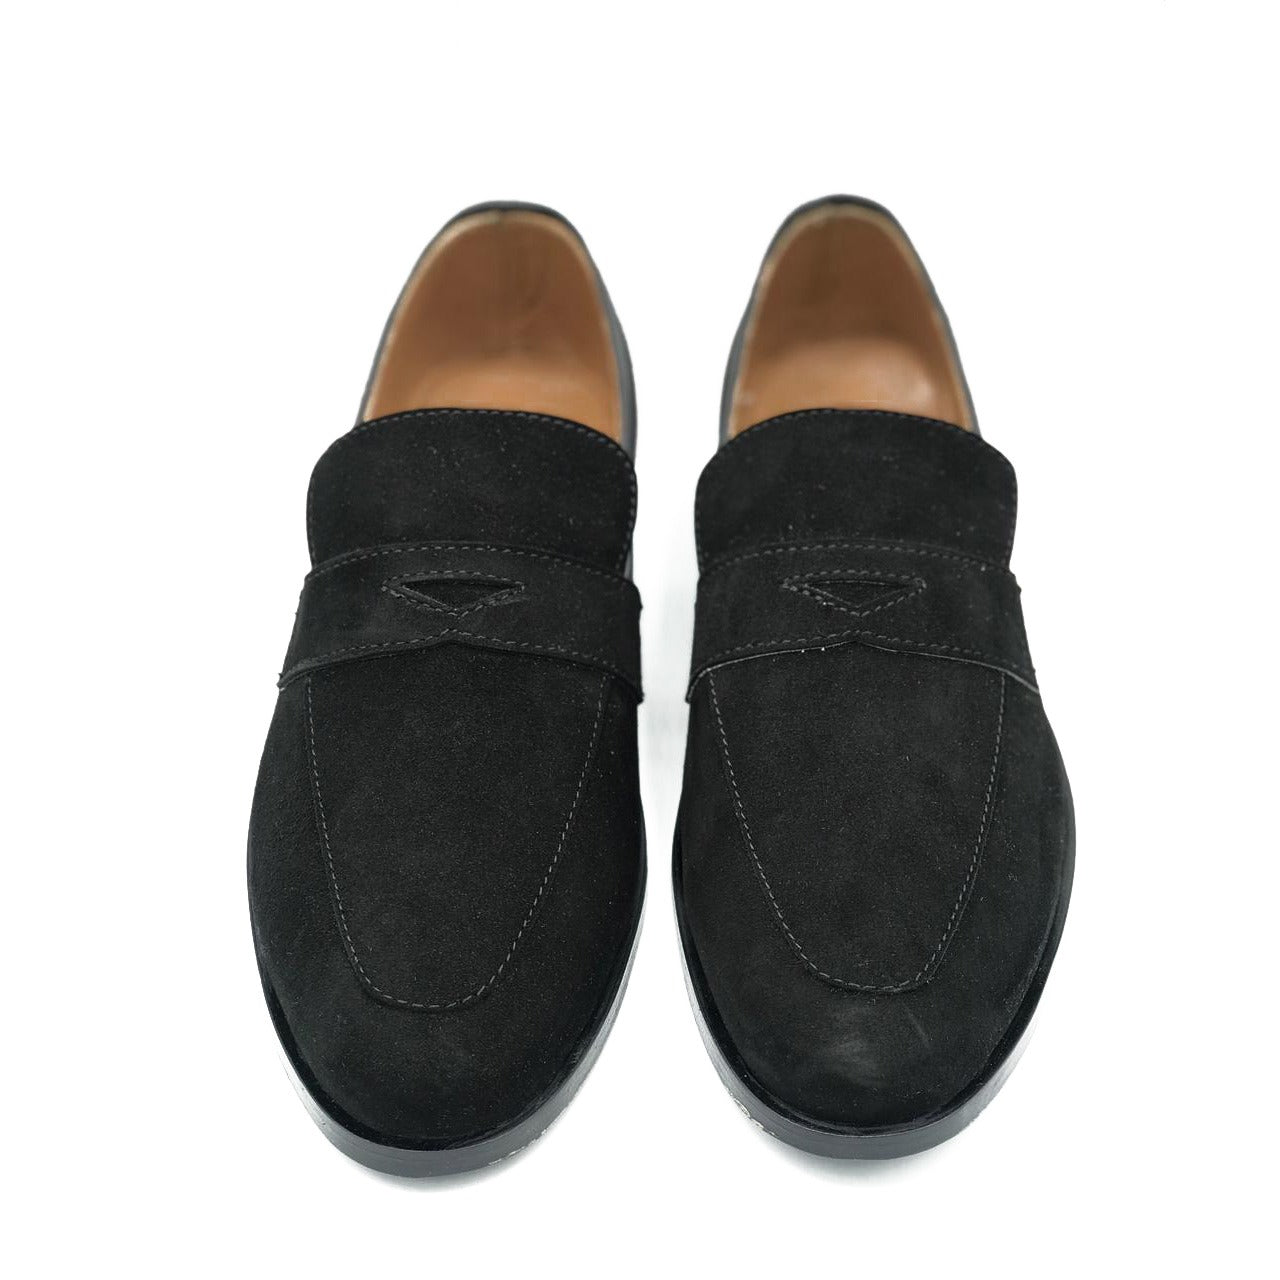 5002-Black Suede Cow Leather Formal Loafer Style – DeVogue